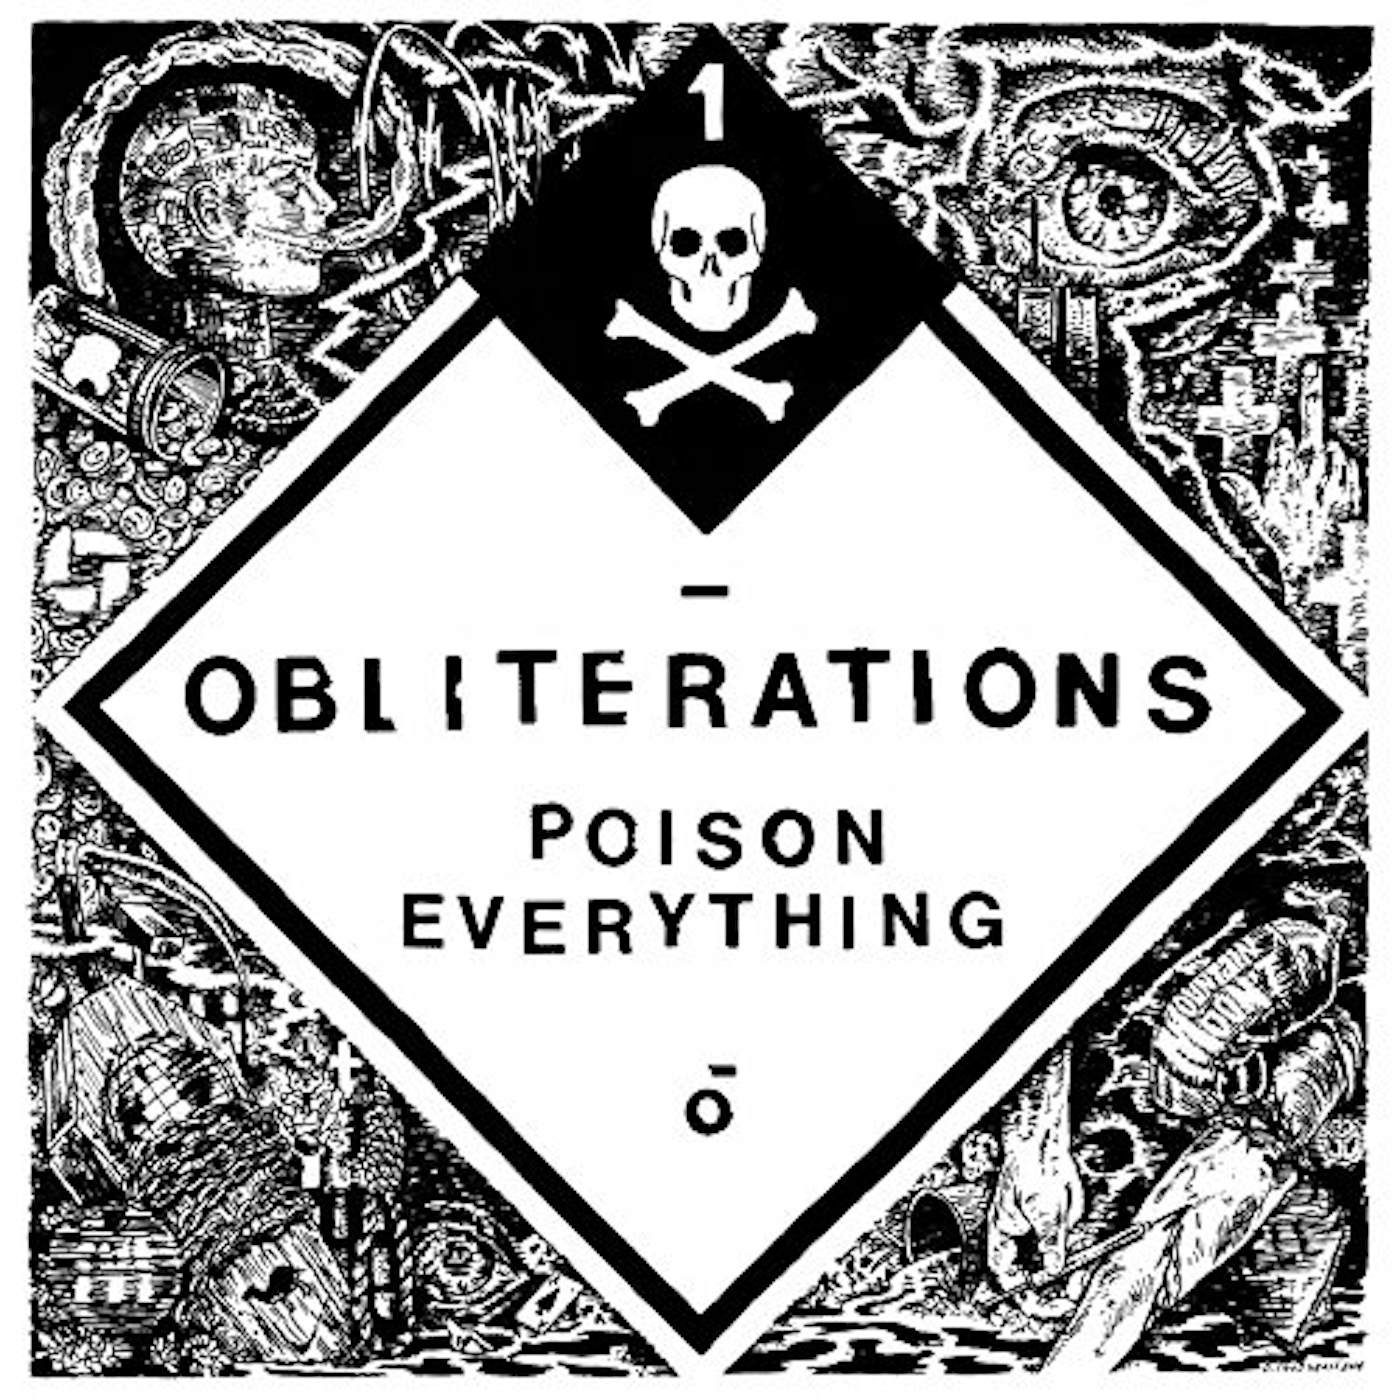 Obliterations POISON EVERYTHING CD